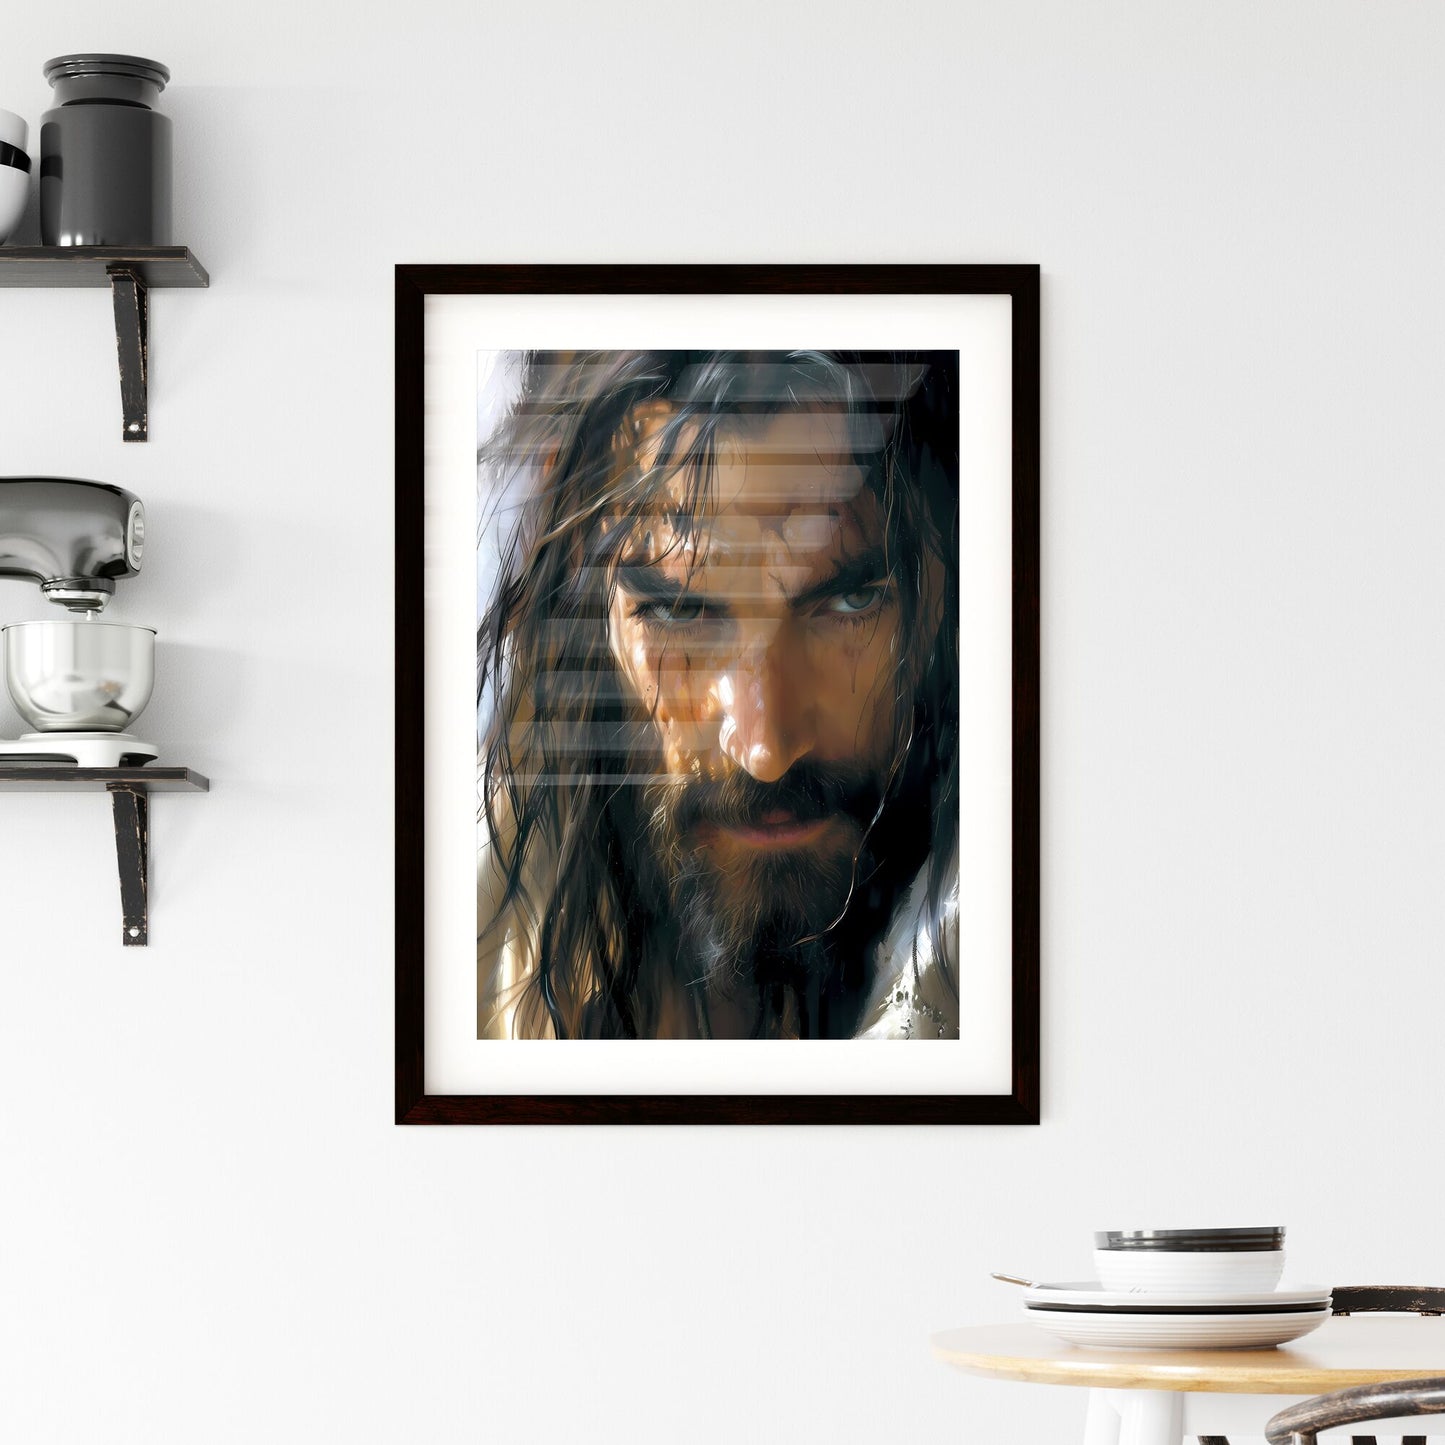 A Christian-themed movie poster, 1980s - Art print of a man with long hair and a beard Default Title